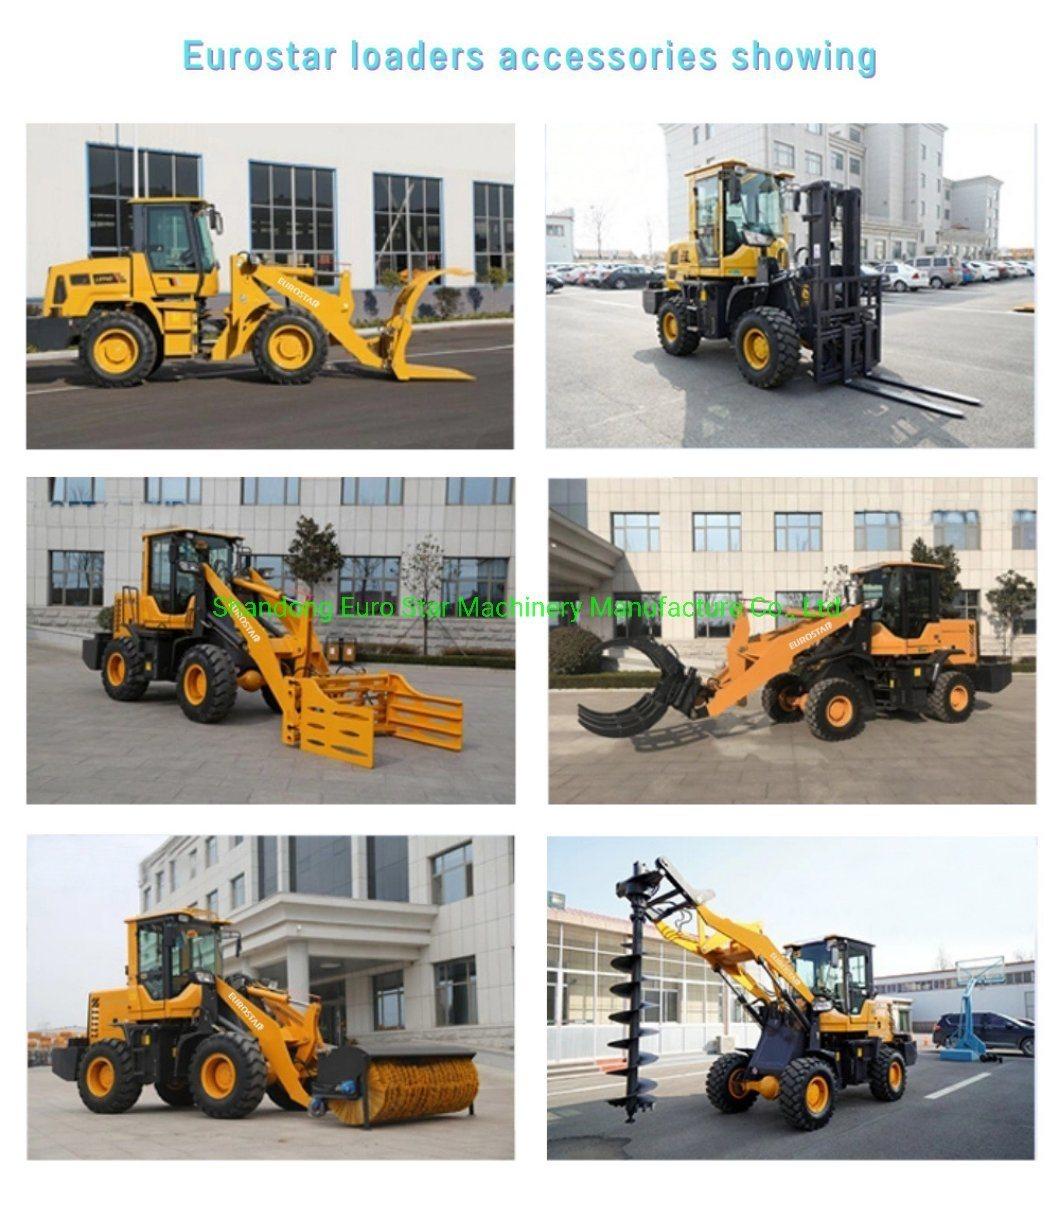 1.8t Wheel Loader Compact Hydraulic Loader Articulated Multifunctional Mini Loader for Construction, Farm and Garden with CE